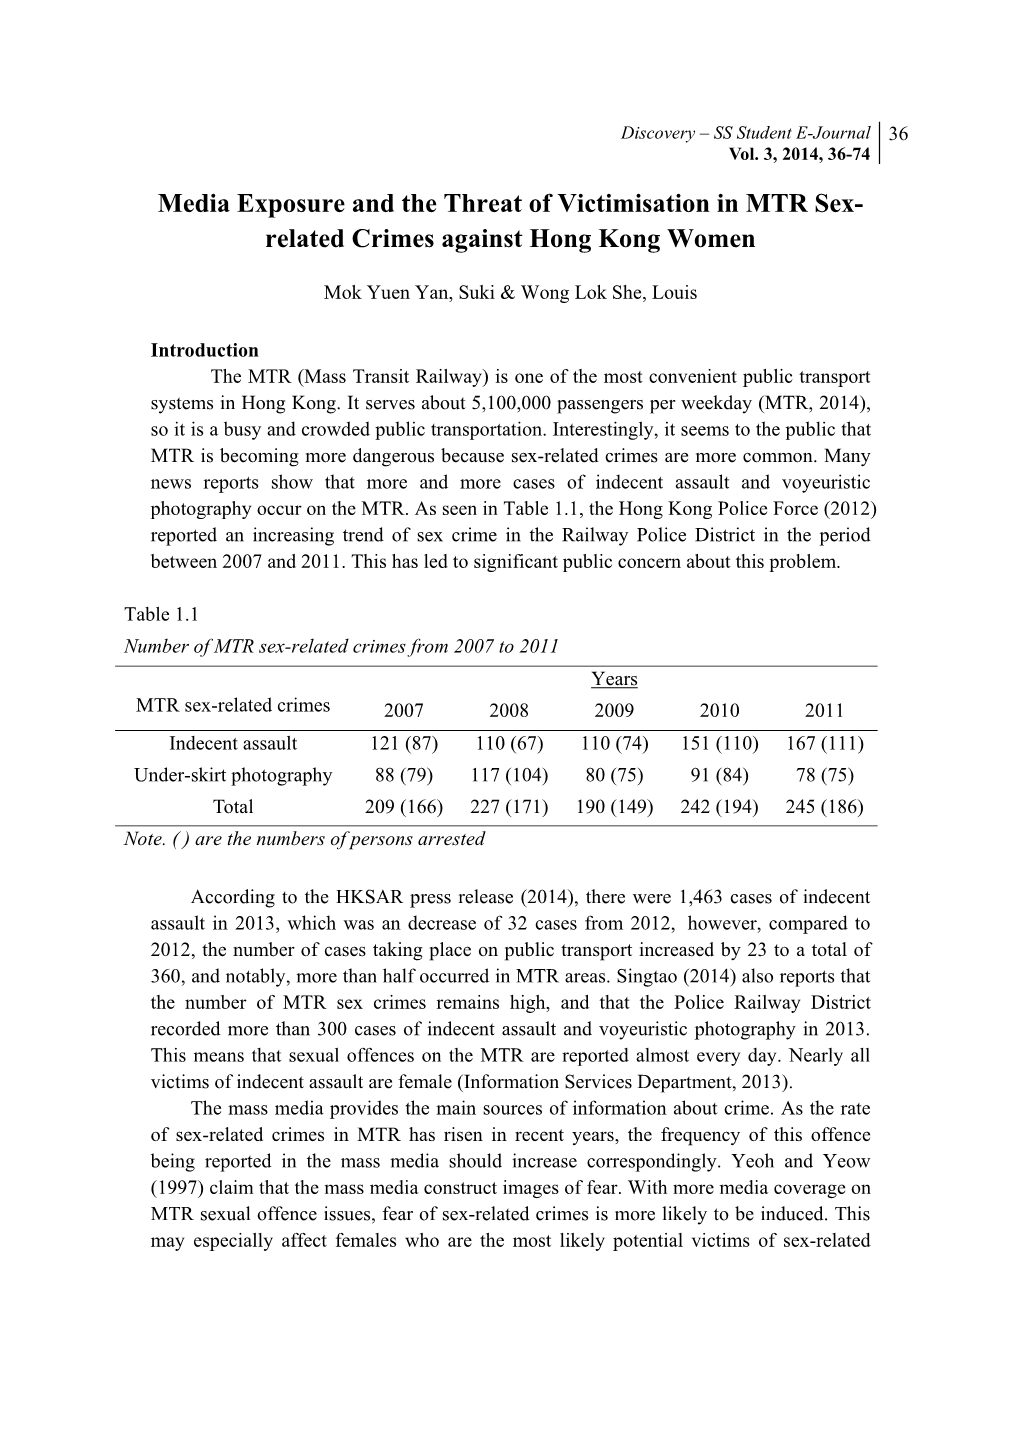 Media Exposure and the Threat of Victimisation in MTR Sex- Related Crimes Against Hong Kong Women